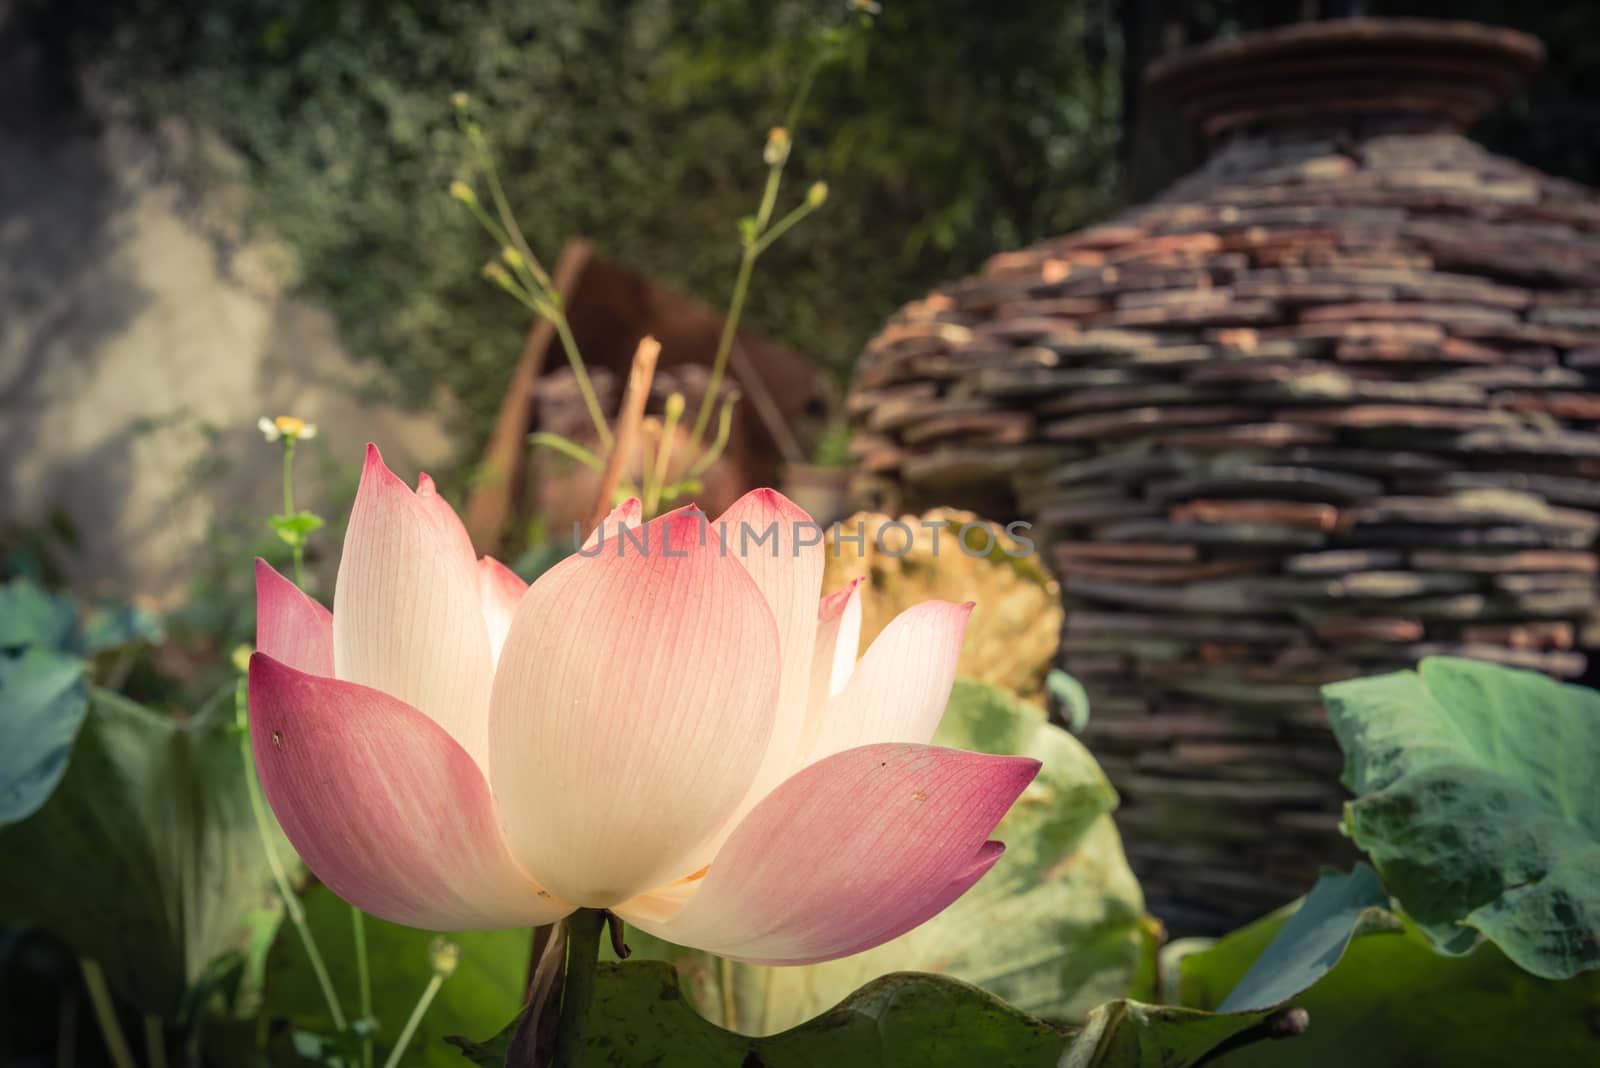 Blooming pink lotus flower with ceramic pot fountain jar in background by trongnguyen